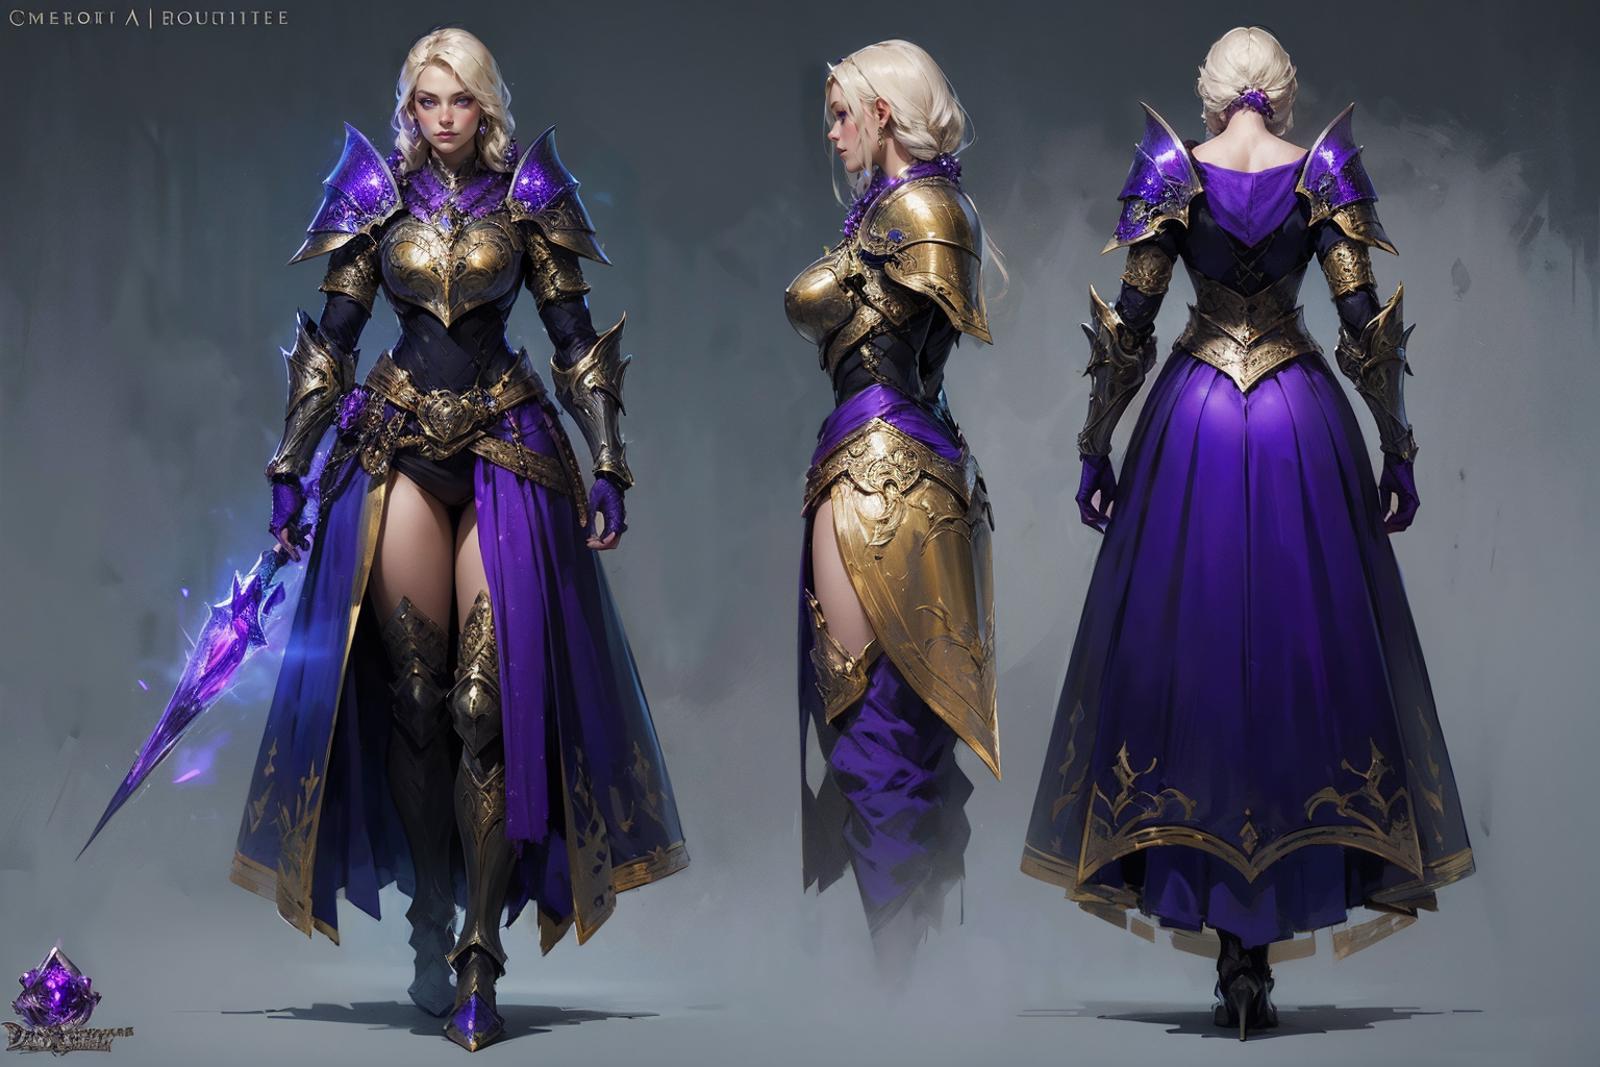 A Pair of Three-Quarter Length Drawings of a Woman in a Purple Dress and Gold Armor.